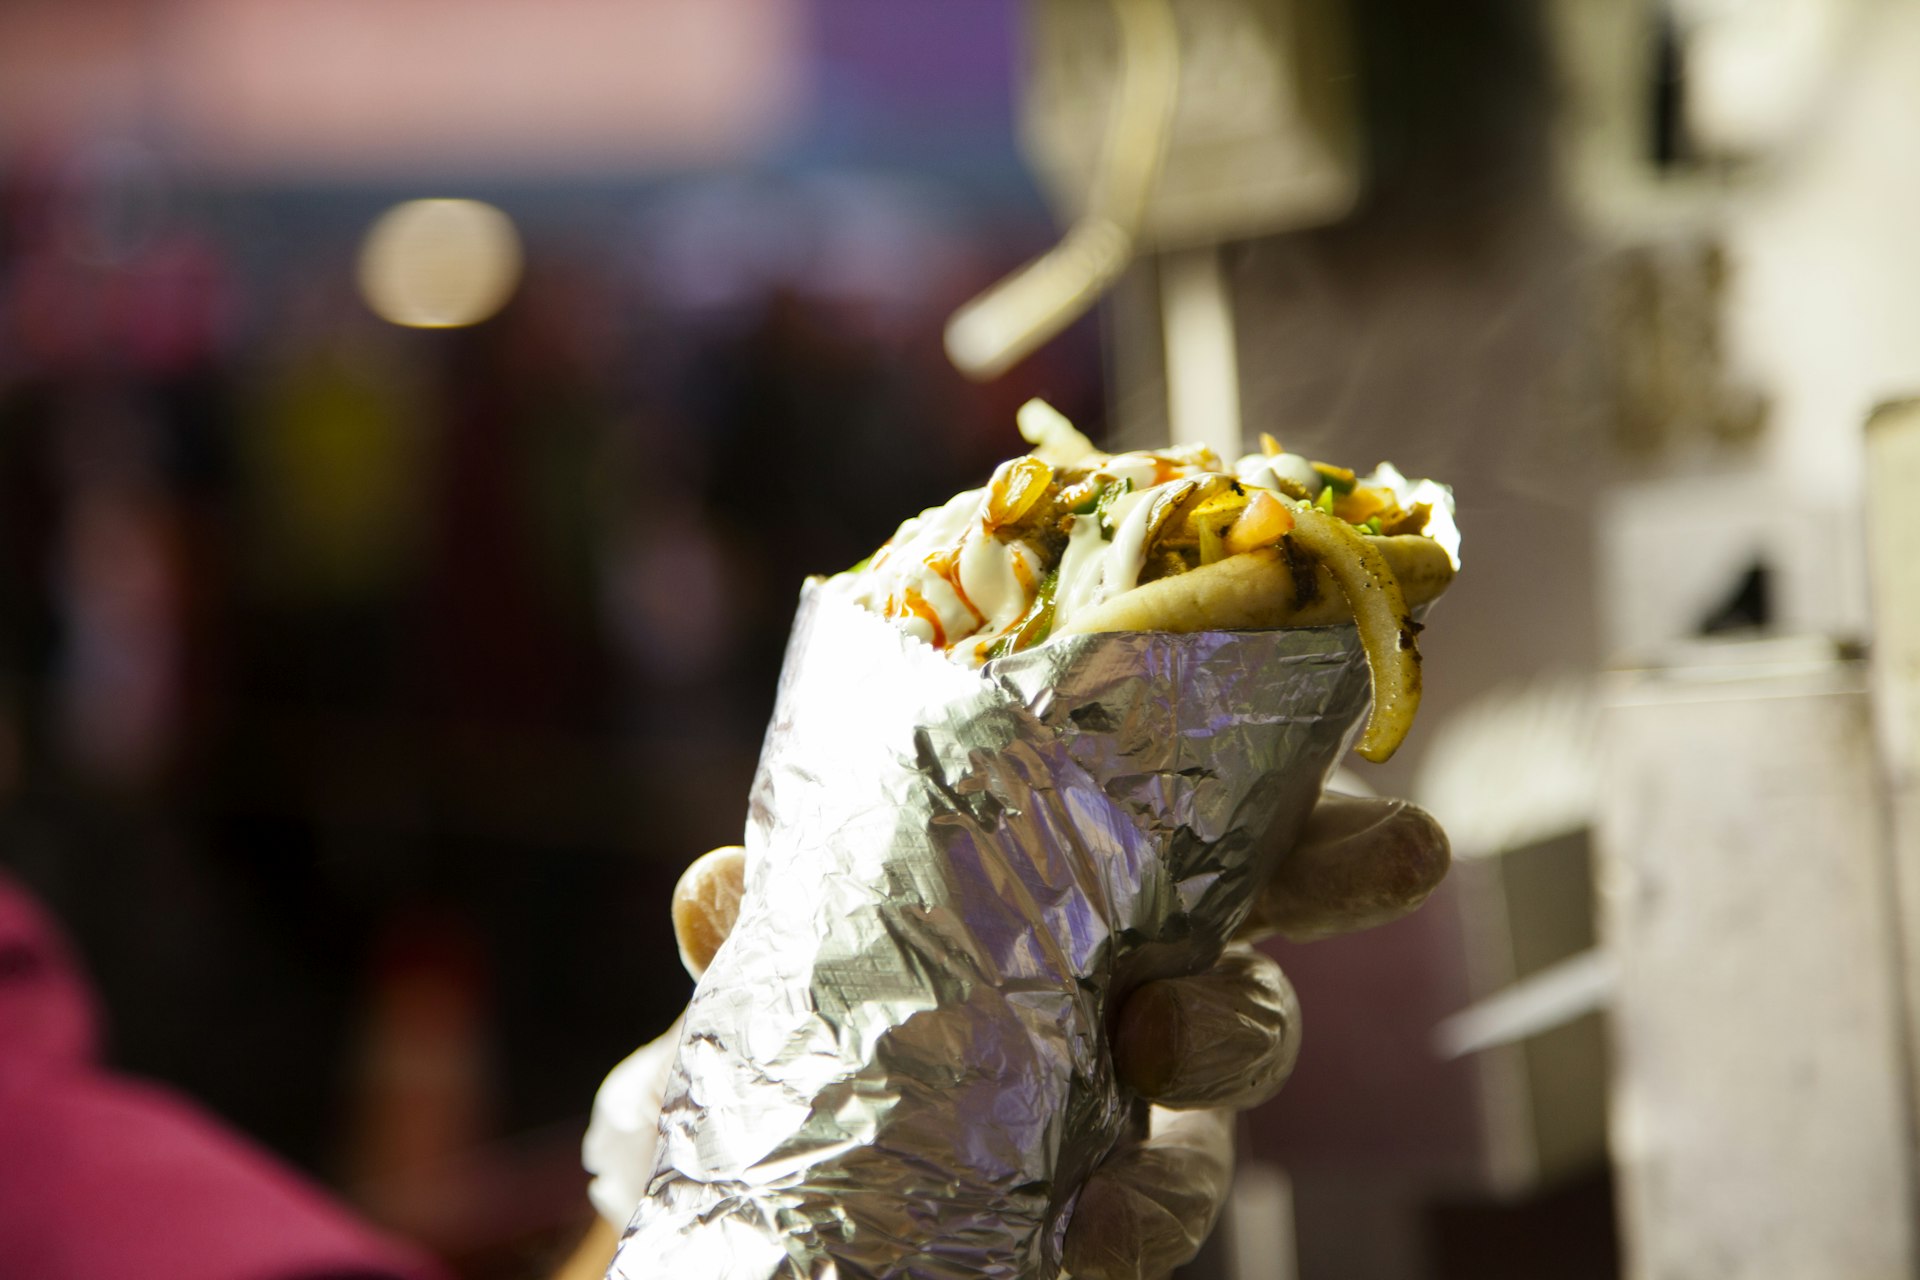 Close-up of food vendor holding a burrito from his food truck, stall on a sidewalk in New York City, USA.  The unrecognizable vendor's hand reaches out to show what he has for sale